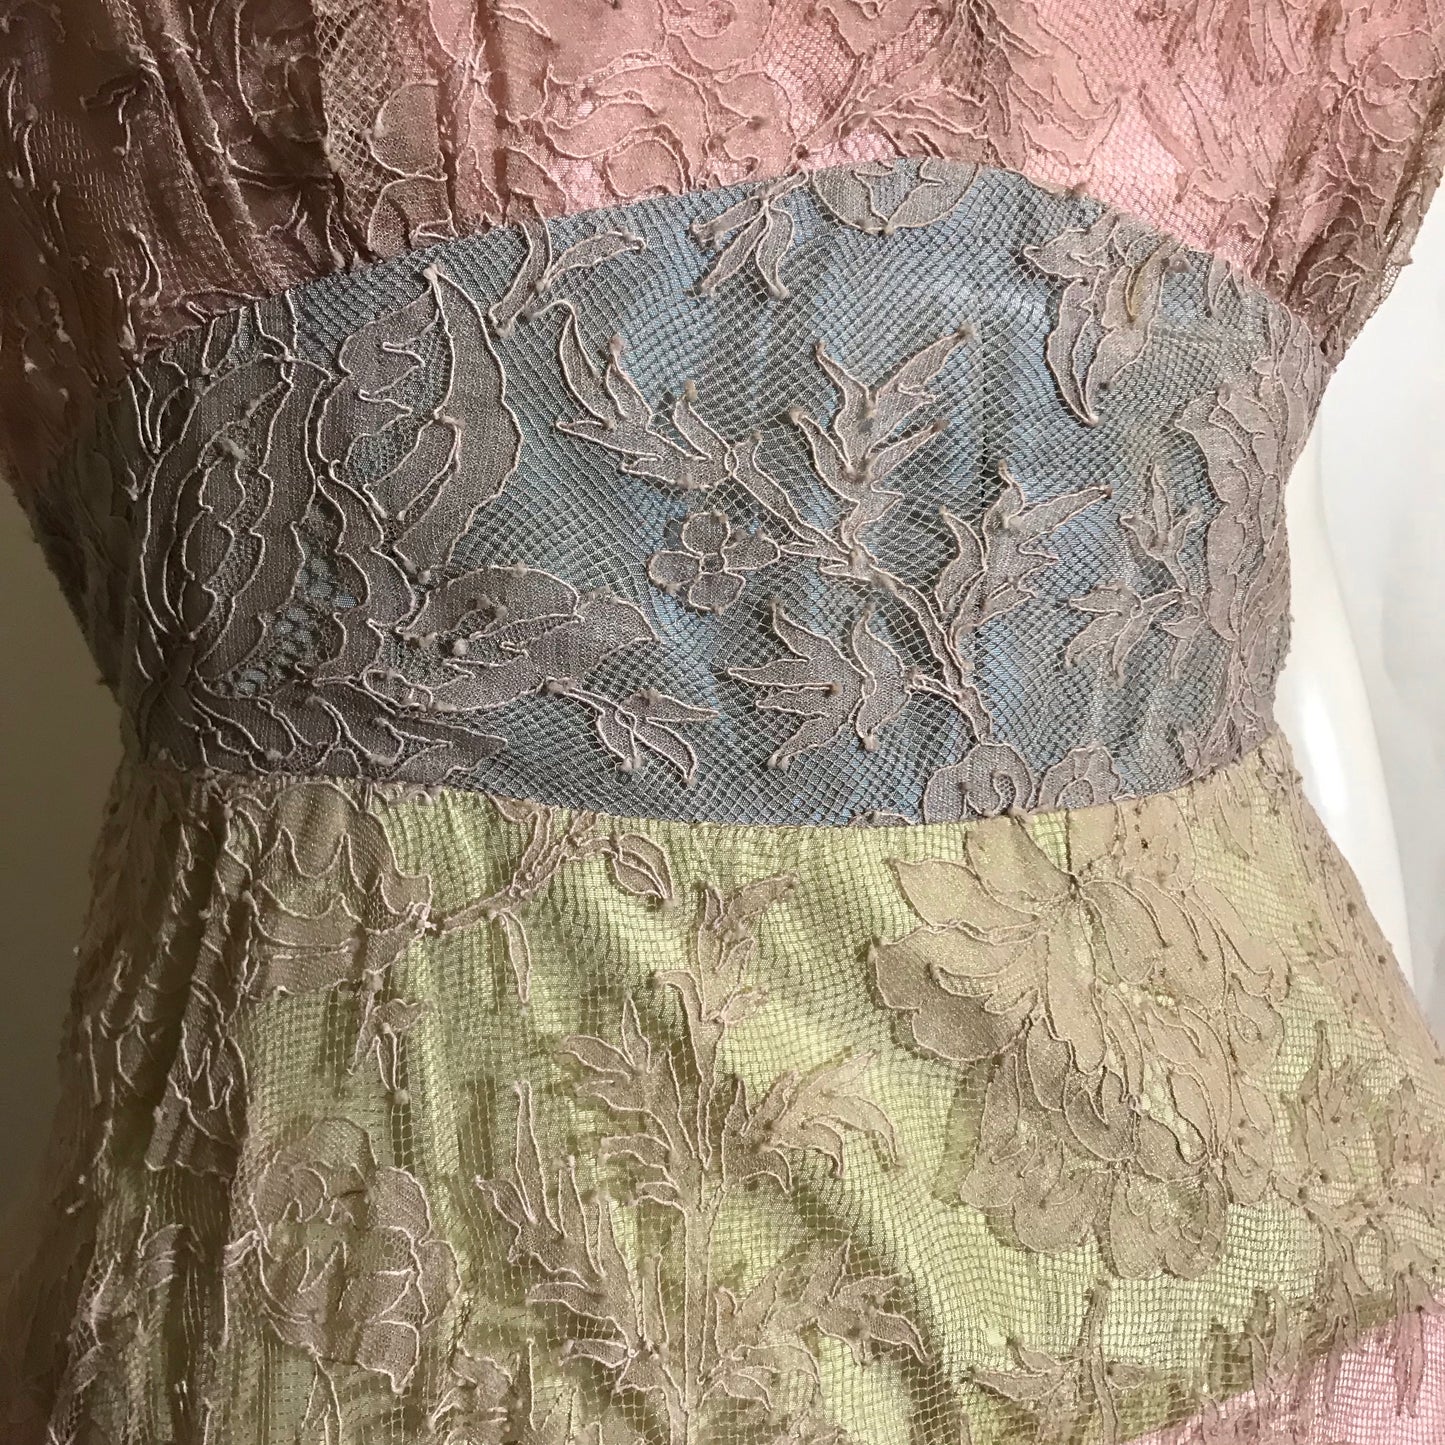 Shades of Sherbet Taffeta Evening Gown with Lace Overlay circa 1940s